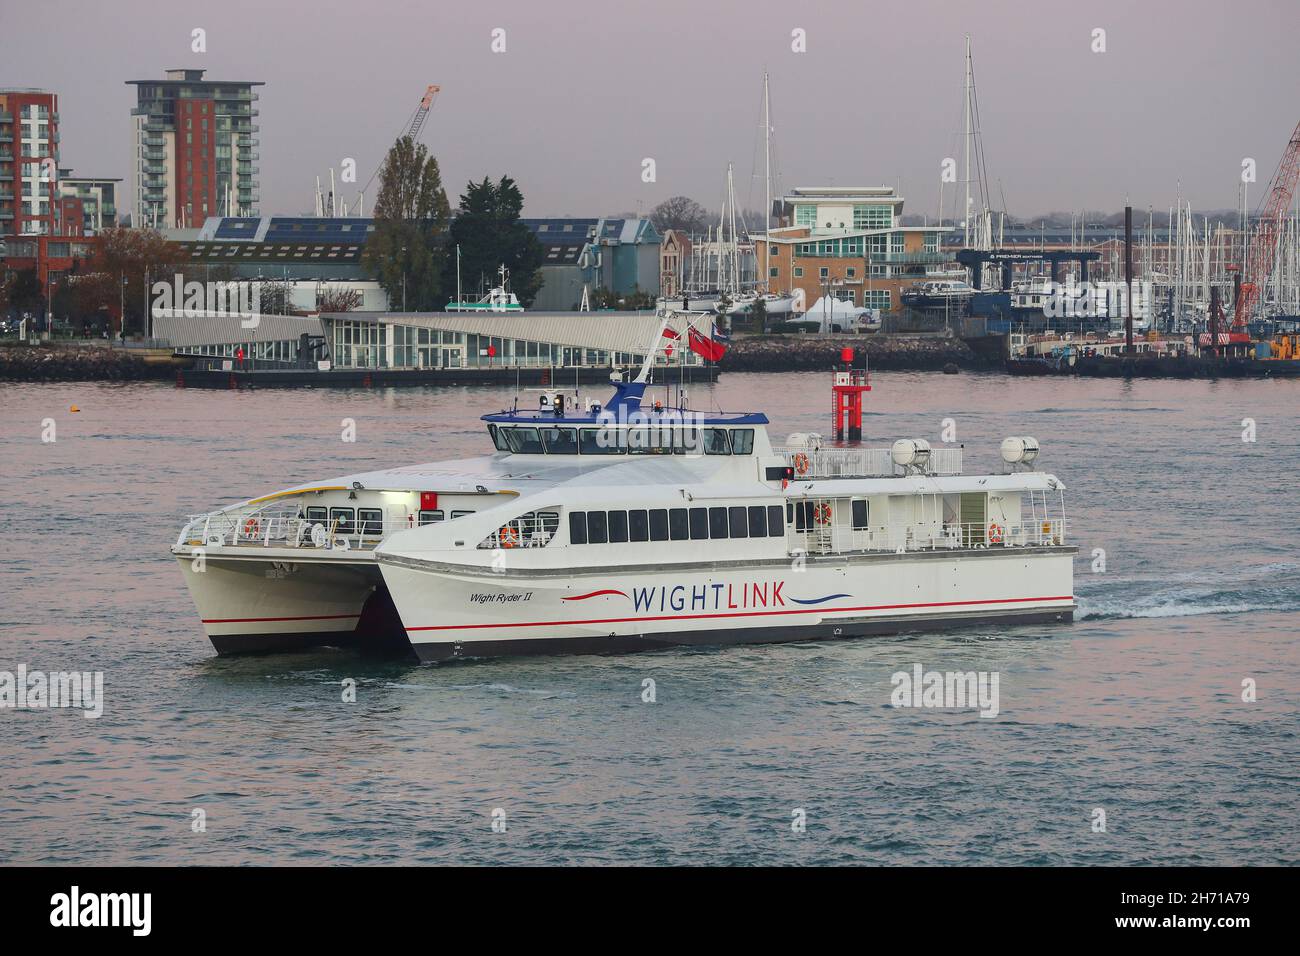 The Wight Link, Wight Rider II fast catamaran pictured leaving Portsmouth heading to Ryde on the Isle of Wight. Stock Photo